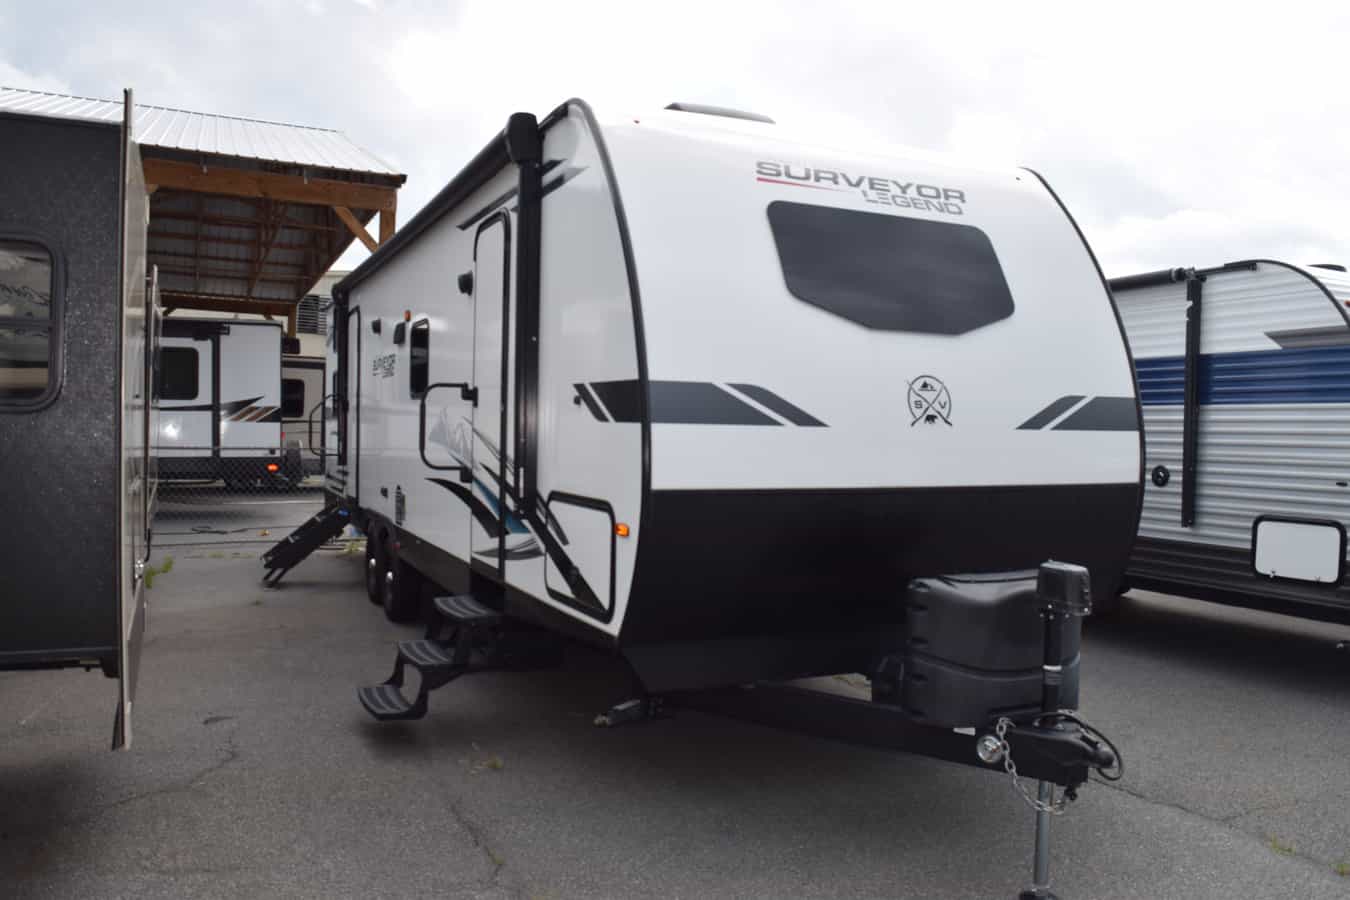 USED 2022 Forest River SURVEYOR 296QBLE